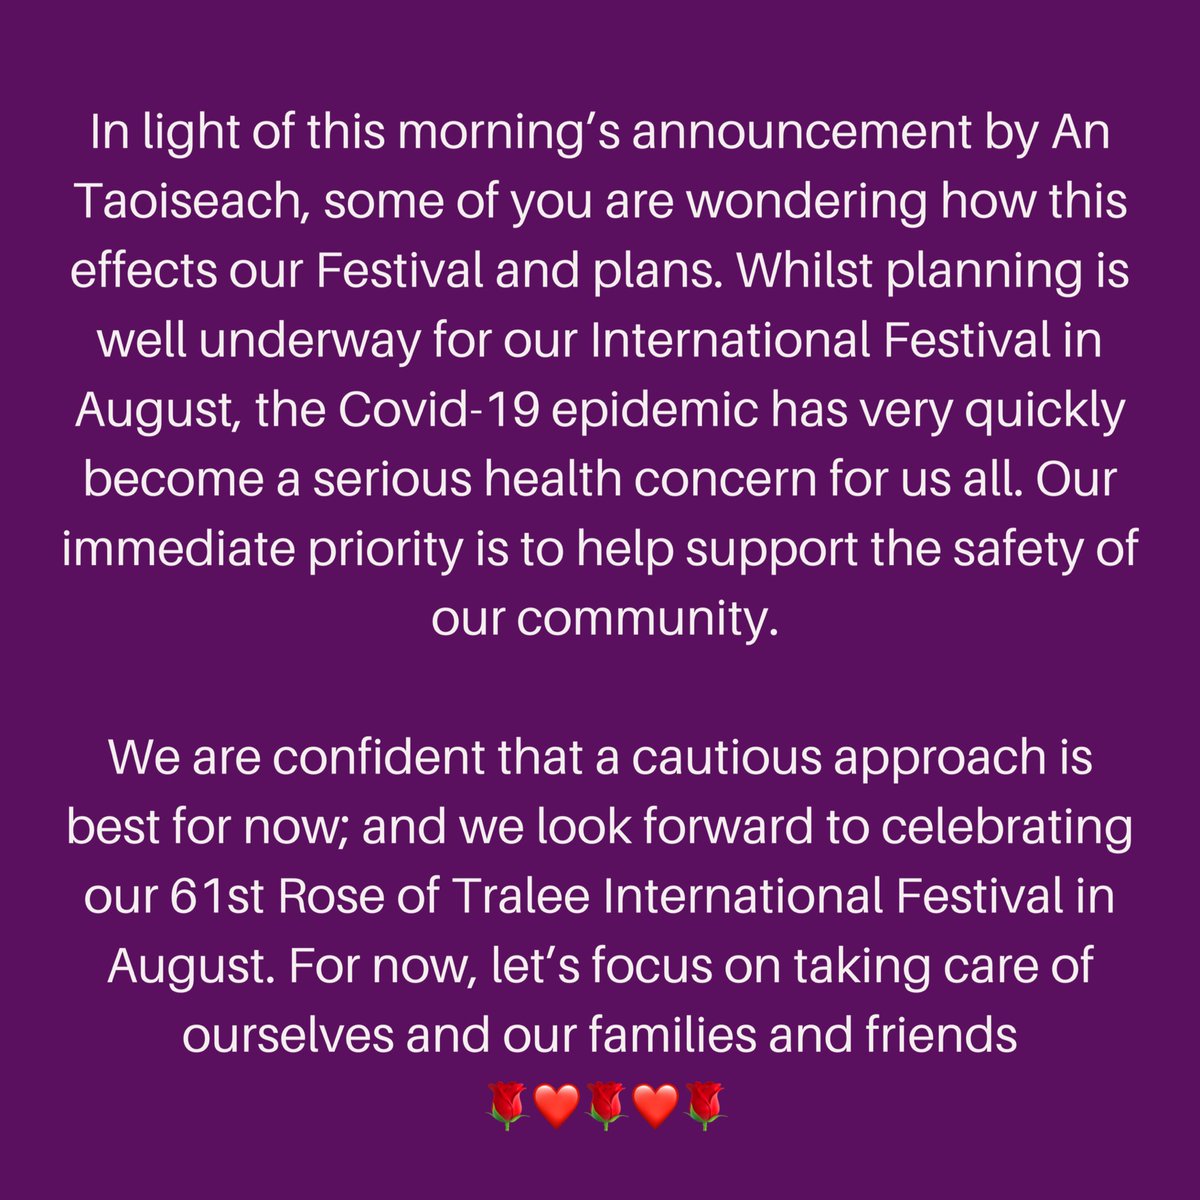 In light of this morning’s announcement by An Taoiseach, some of you are wondering how this effects our Festival and plans ... We are confident that a cautious approach is best for now; and we look forward to celebrating our 61st Festival in August 🌹❤🌹❤🌹 #roseoftralee